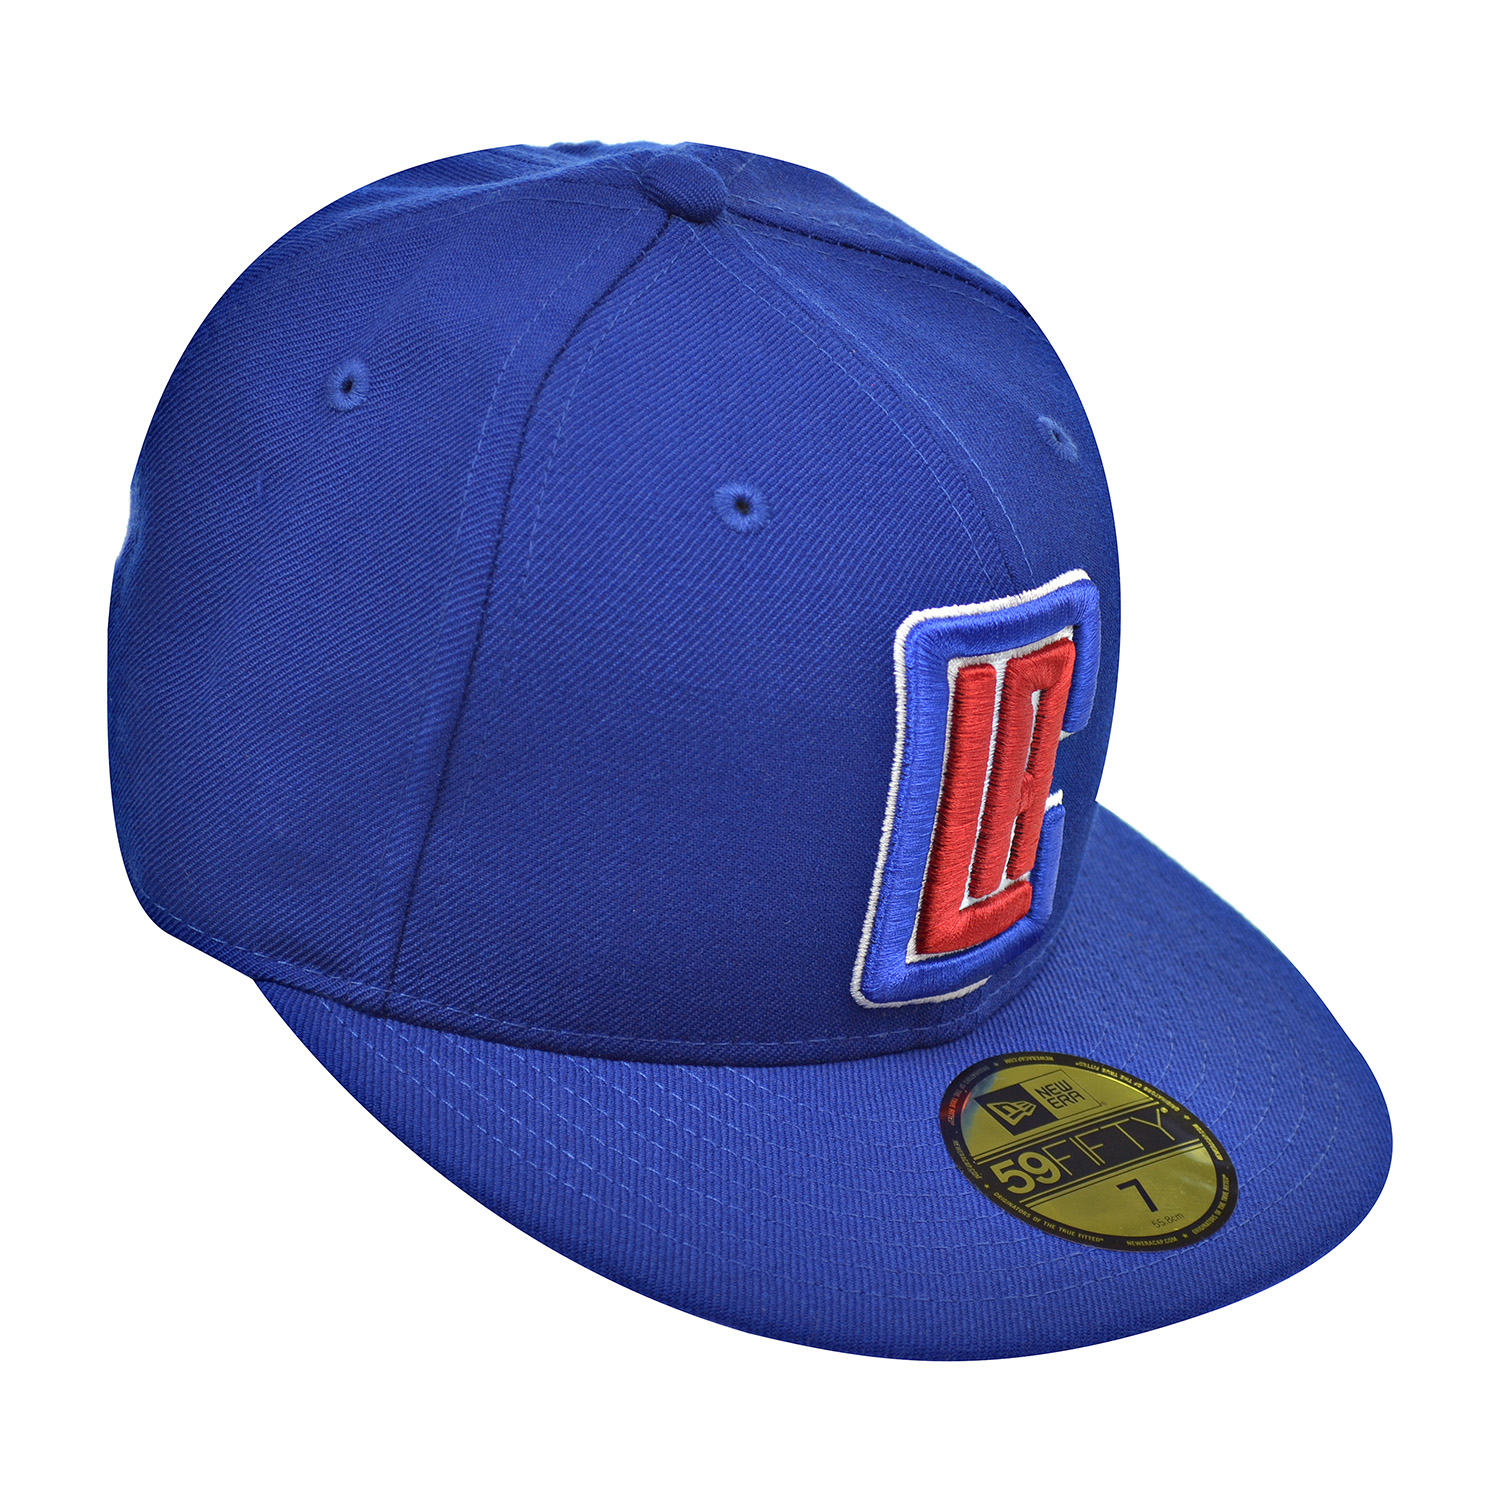 New Era Los Angeles Clippers NBA 59Fifty Men's Fitted Hat Blue-Red | eBay